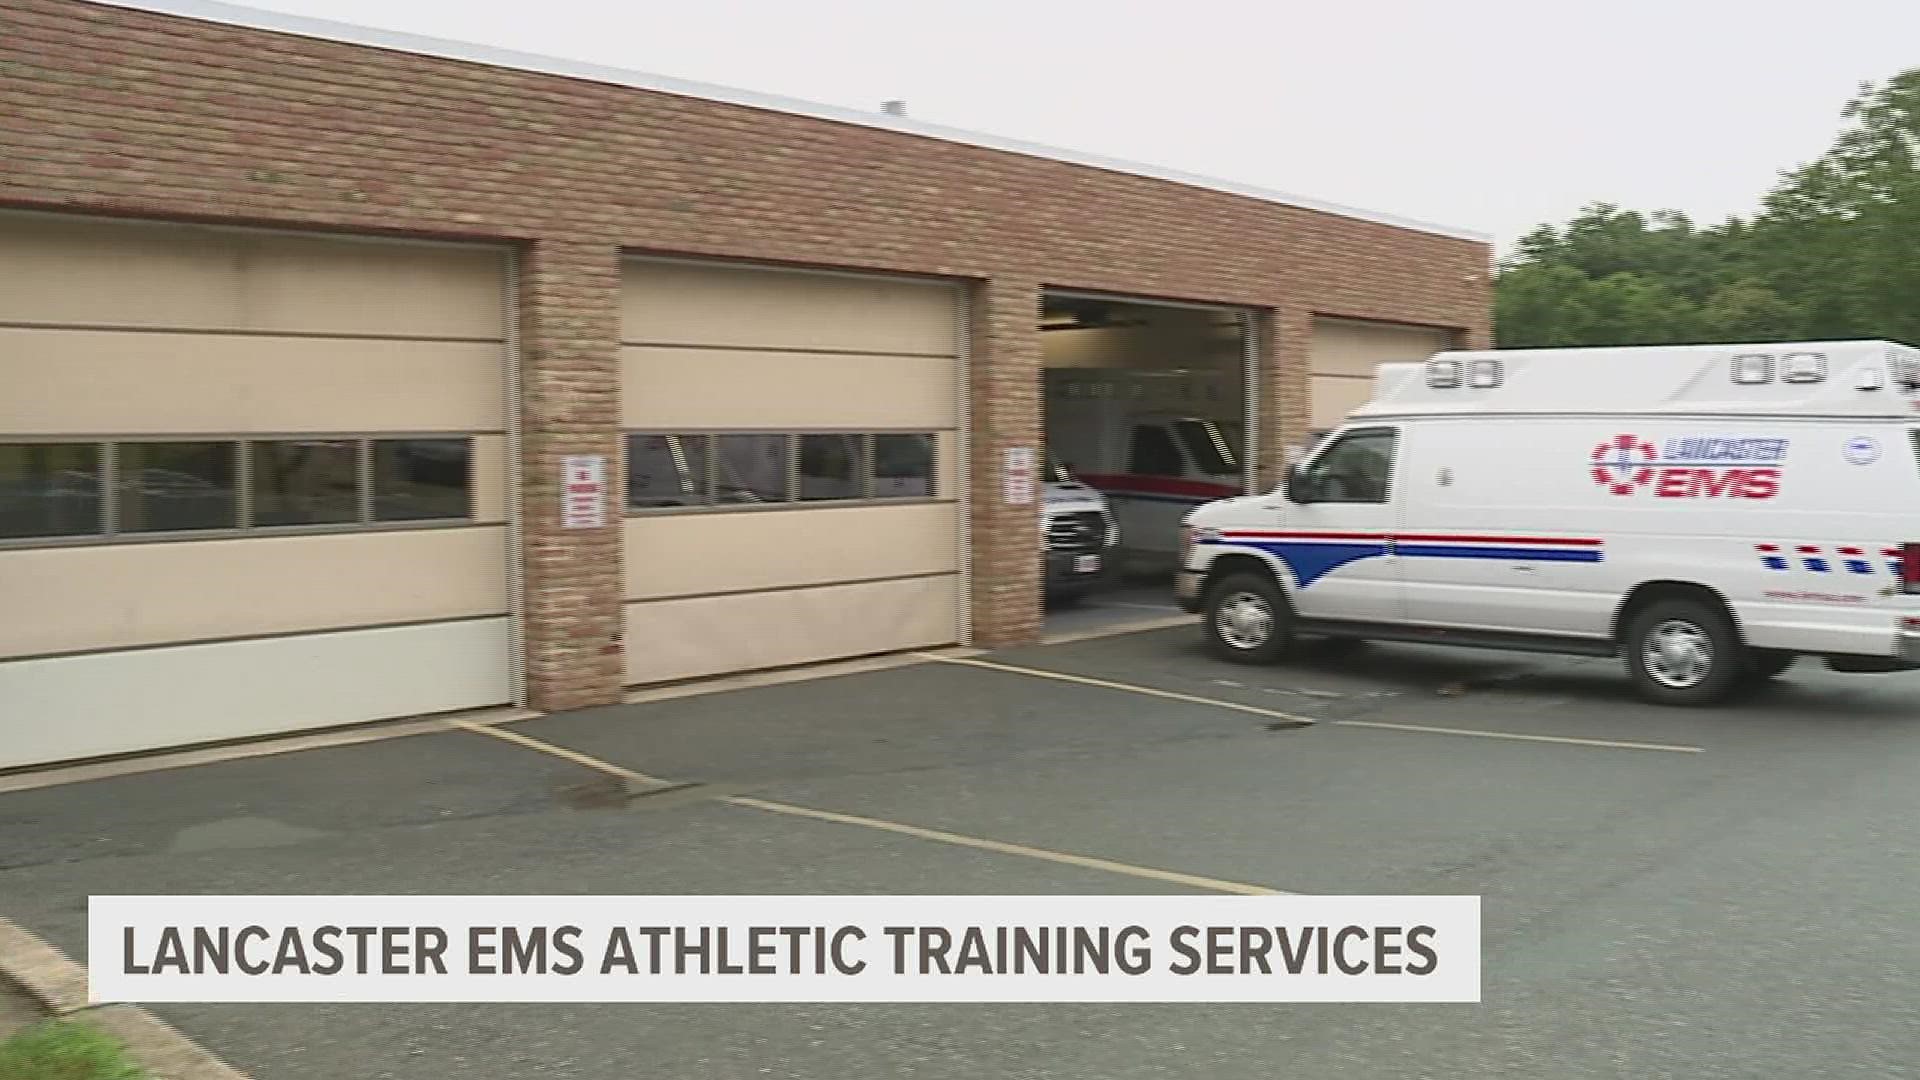 The athletic training collaboration between a local EMS agency and a local health system for workplace injury prevention is the first of its kind.